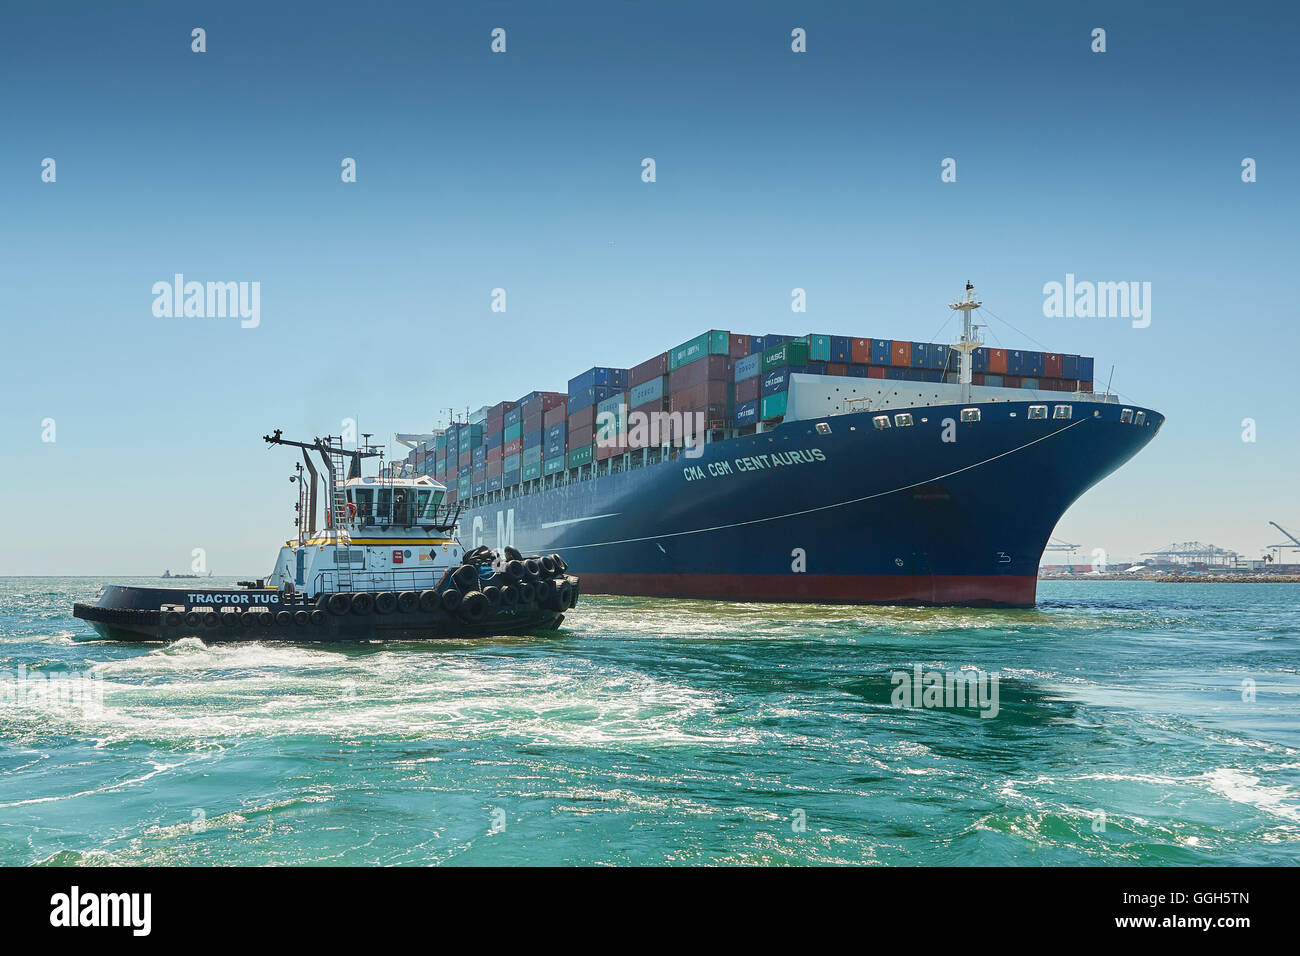 The CMA CGM Centaurus Container Ship Is Manoeuvred Towards Pier J In The Long Beach Container Terminal, Los Angeles, California, USA. Stock Photo